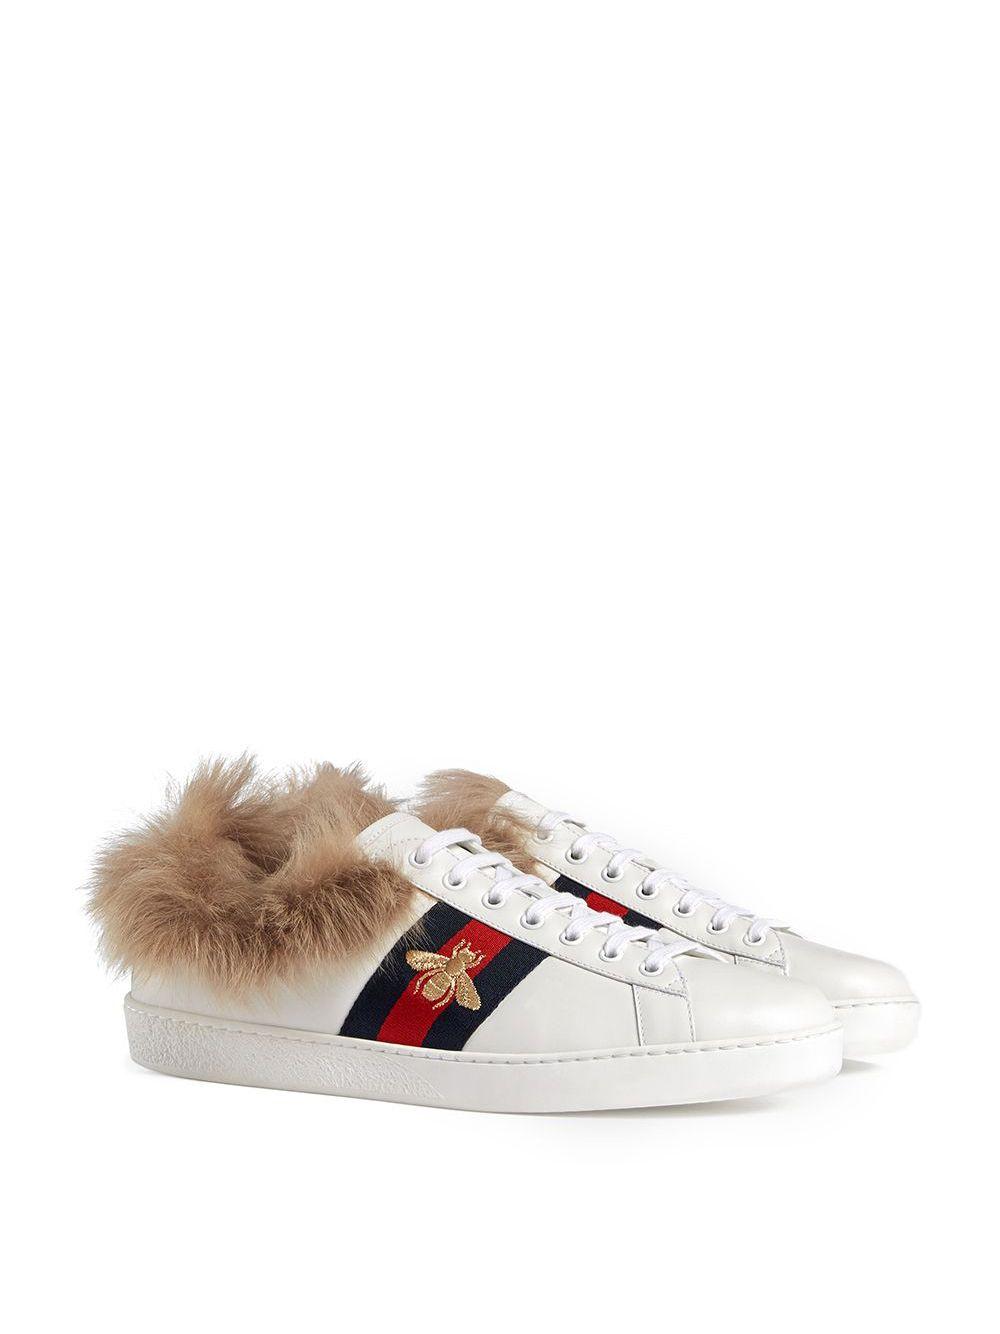 Gucci Ace Sneaker With Fur in White for Men - Lyst